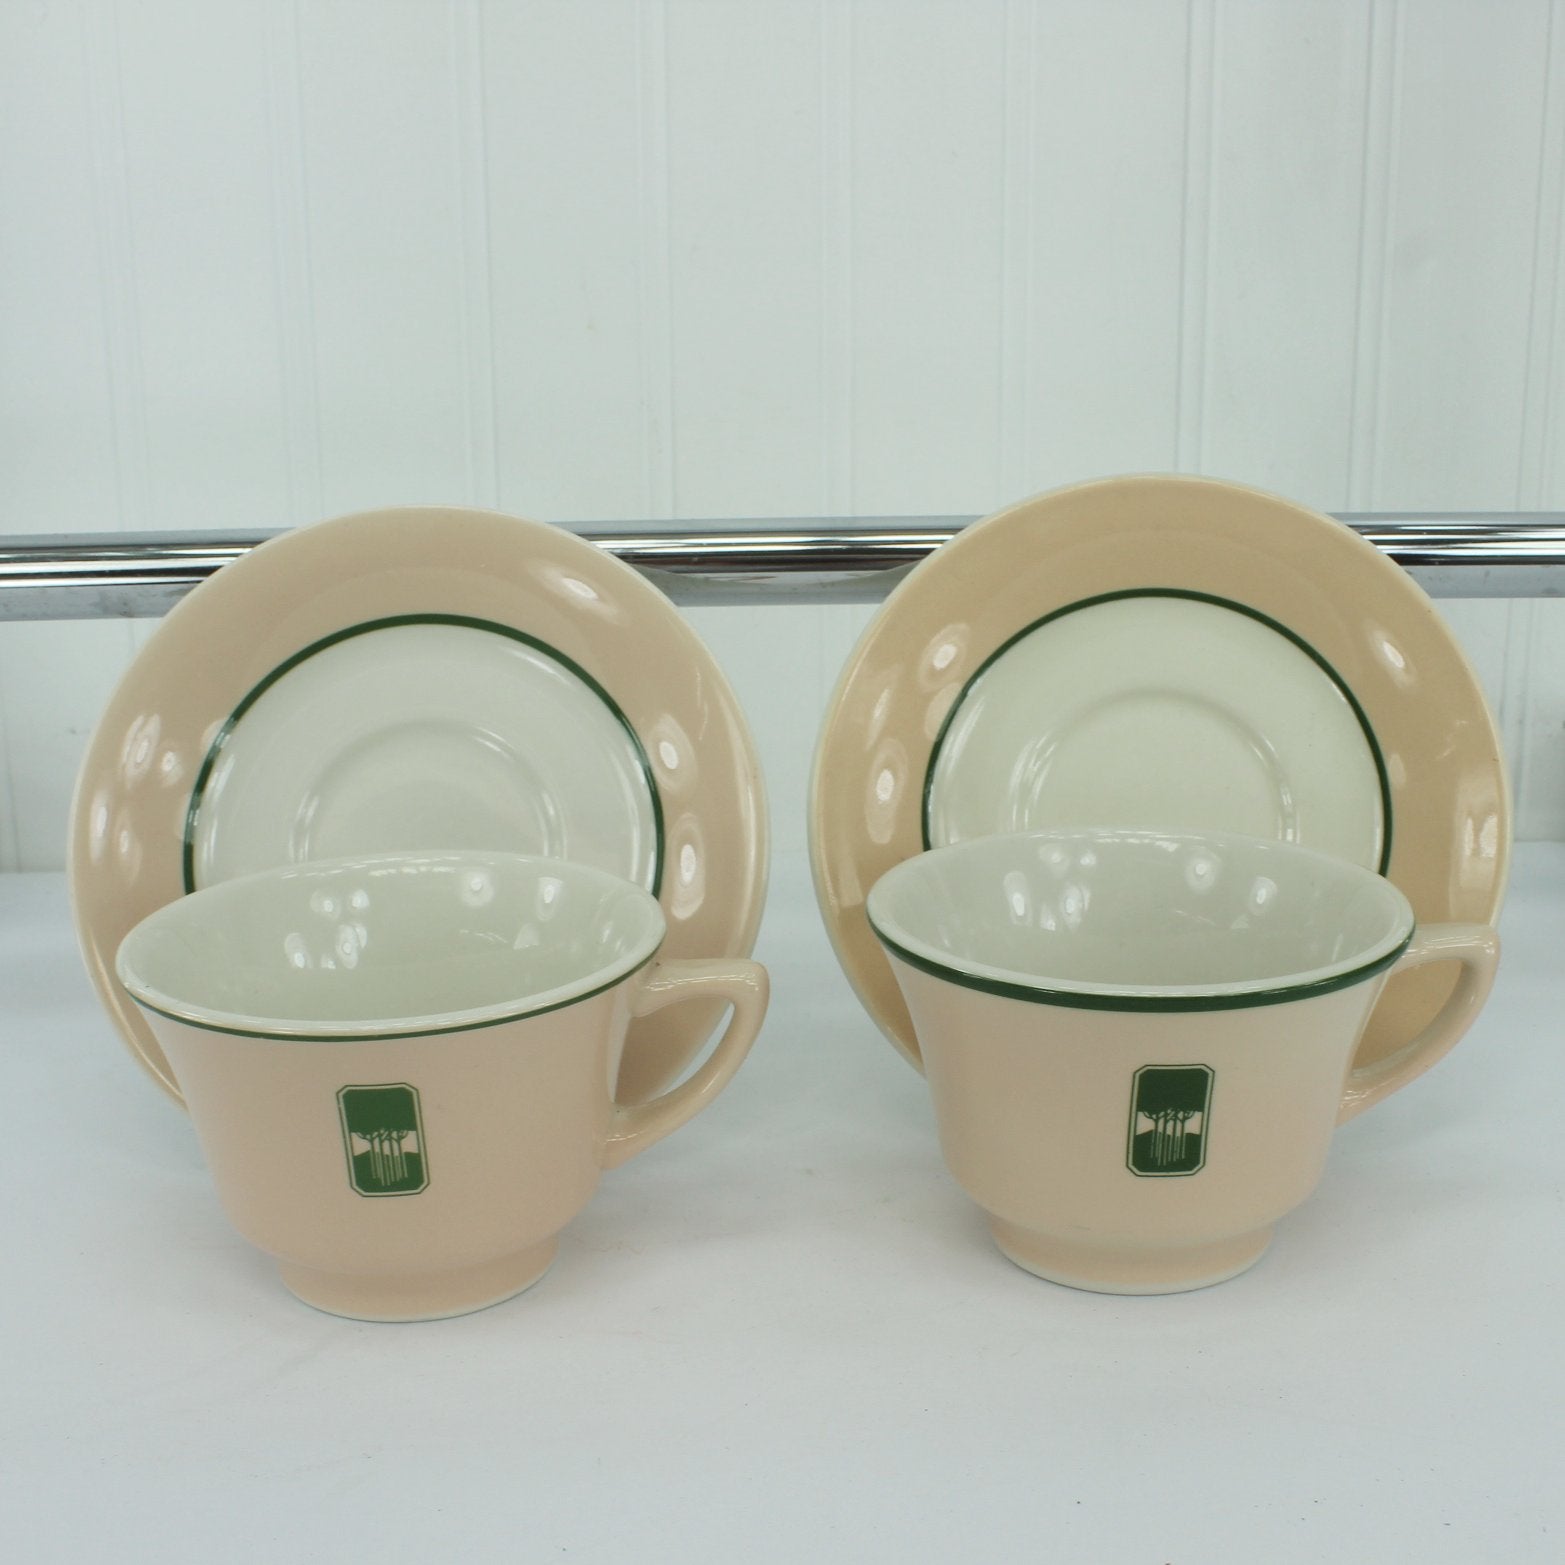 Grove Park 2 Pattern Cups and Saucers Mix Maker Syracuse Mayer Tree Logo excellent condition